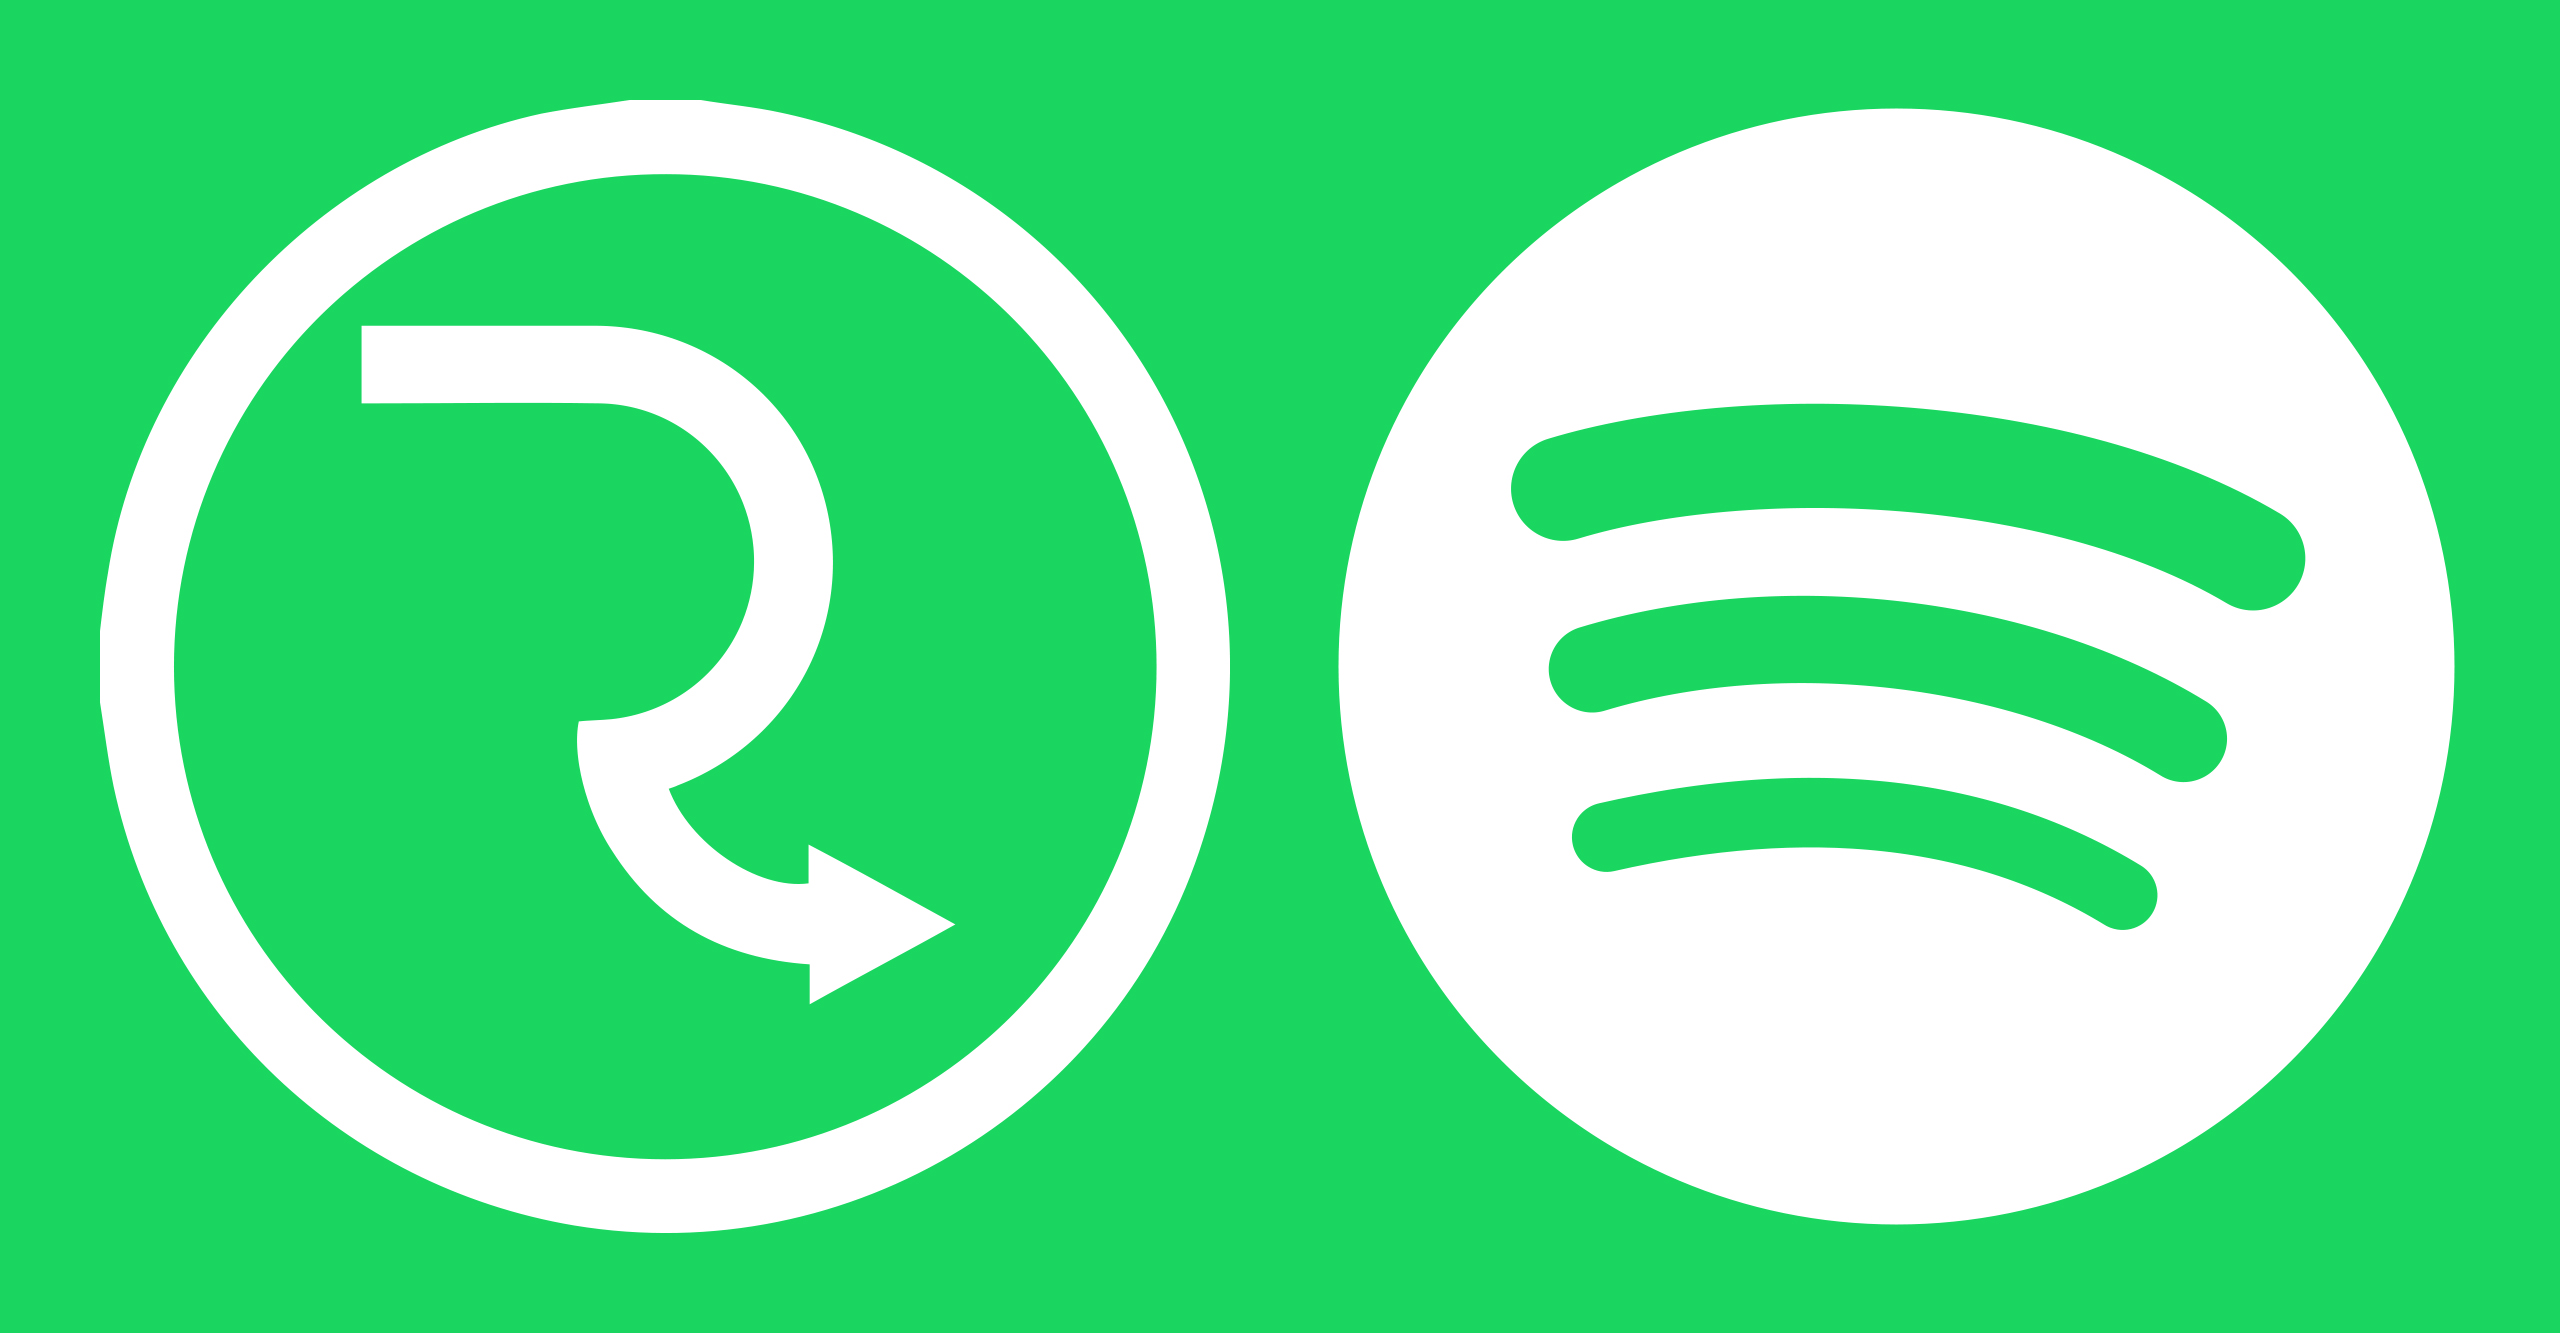 How to upload a song to Spotify